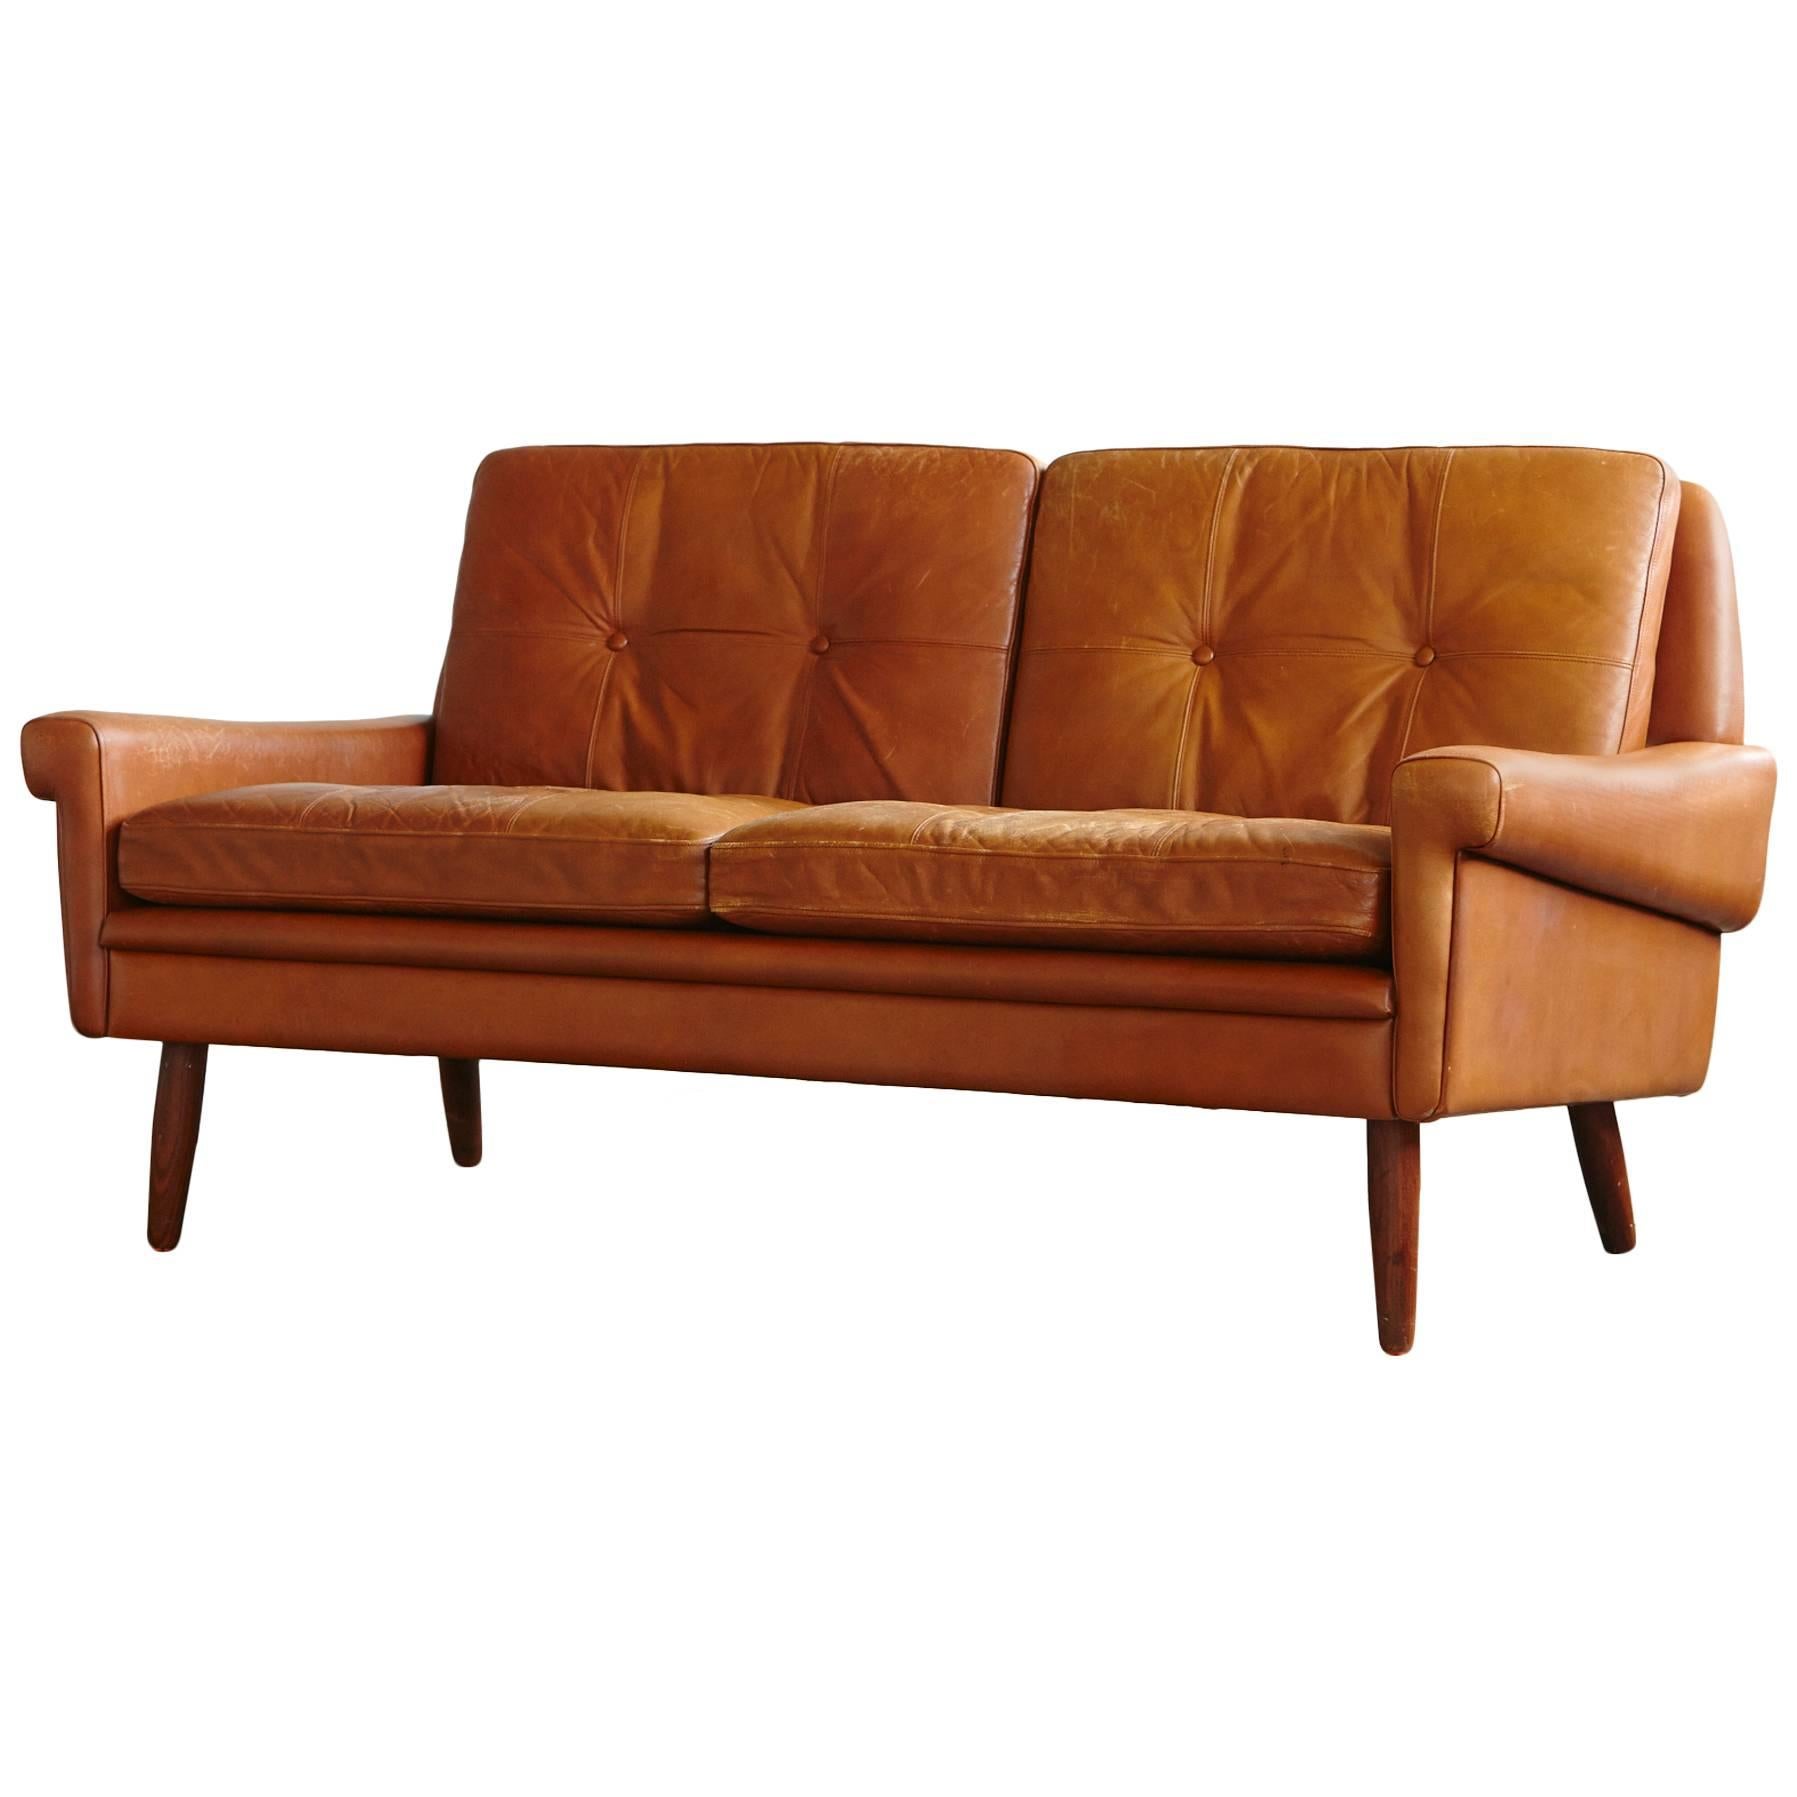 Two-Seat Danish Leather Sofa by Svend Skipper from the 1960s